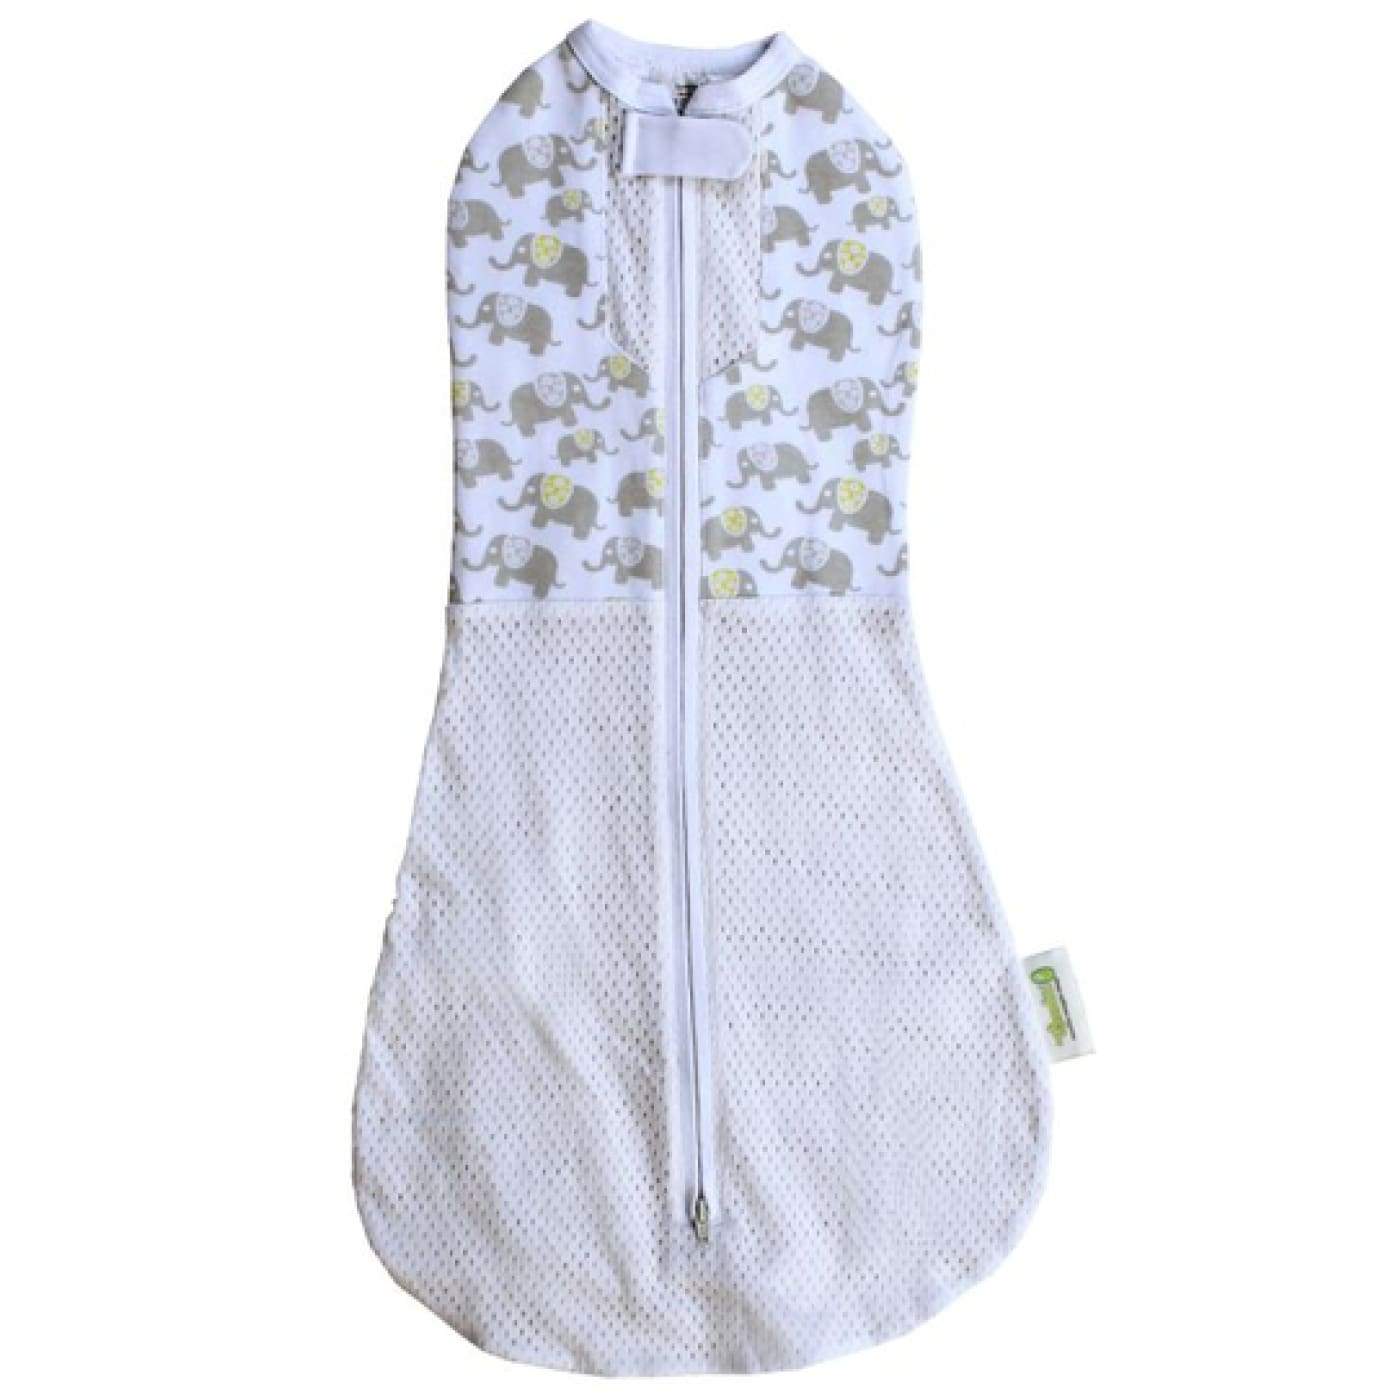 Woombie Summer Convertible Happy Elephants - Newborn - Manchester - Swaddles and Wraps